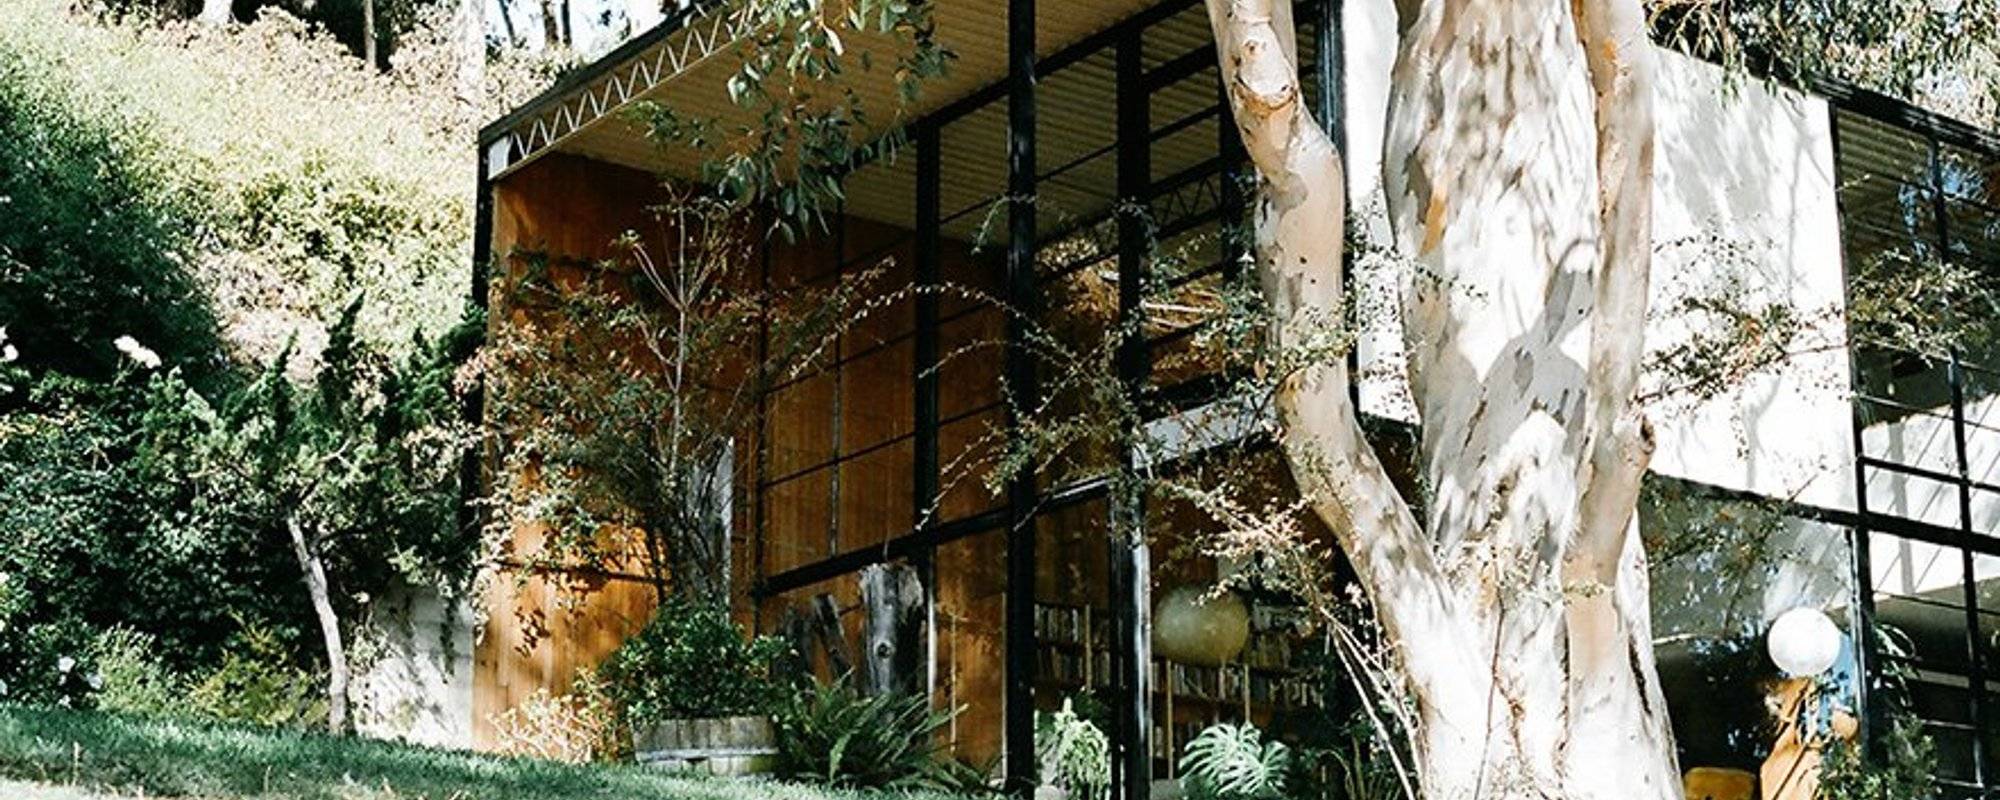 Exploring Los Angeles - My Visit to the Eames House